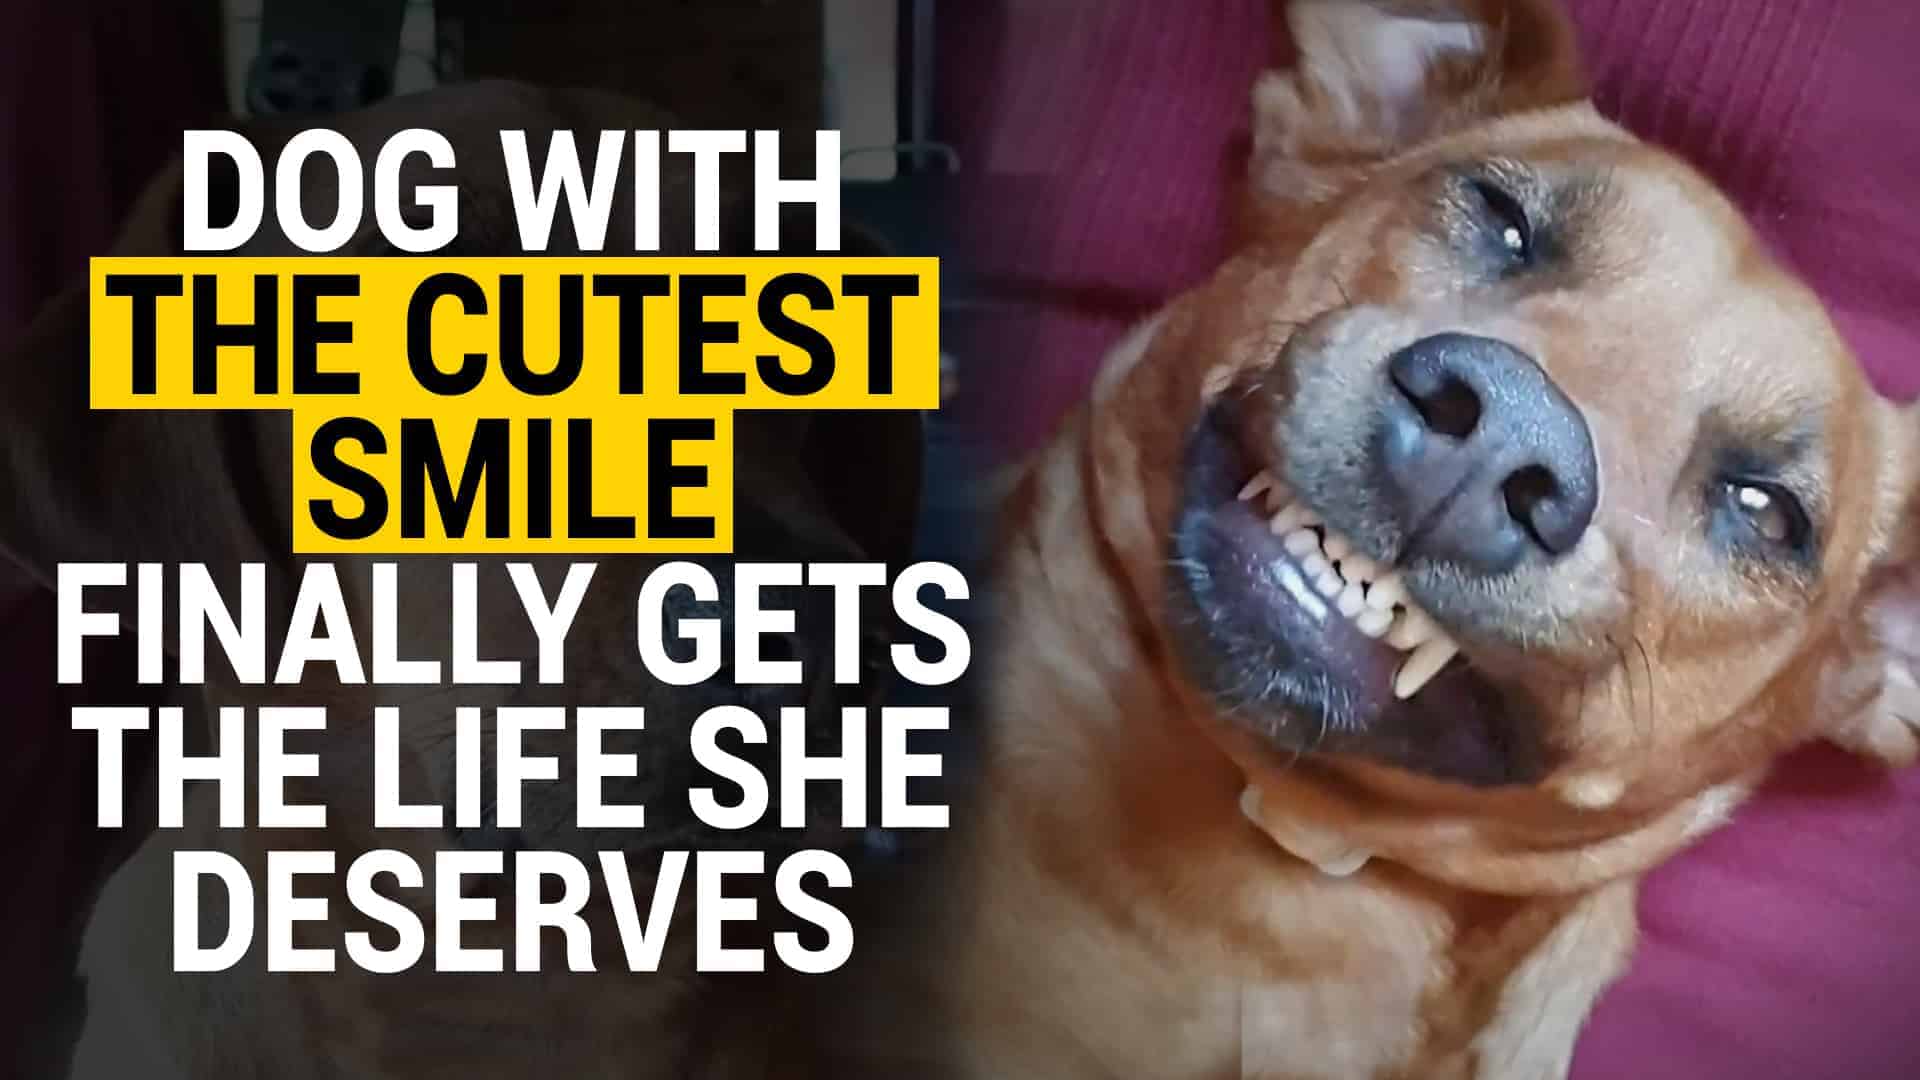 A Dog With a Cute Smile Gets the Life She Deserves